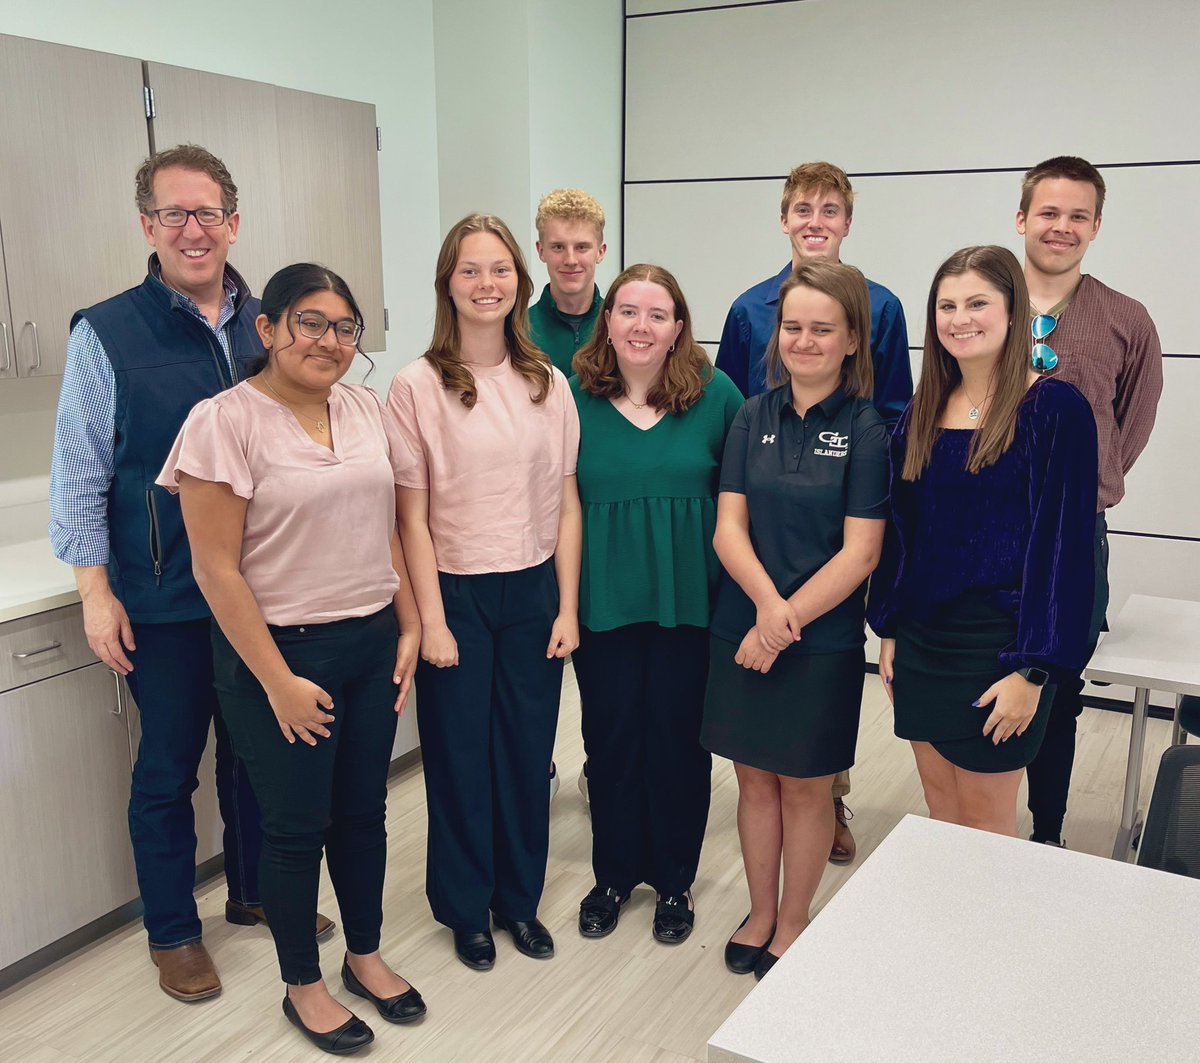 This week, my Youth Advisory Council held our spring meeting. Many thanks to @UNKearney leadership for joining us to discuss their approach to empowering #NE03 through education.